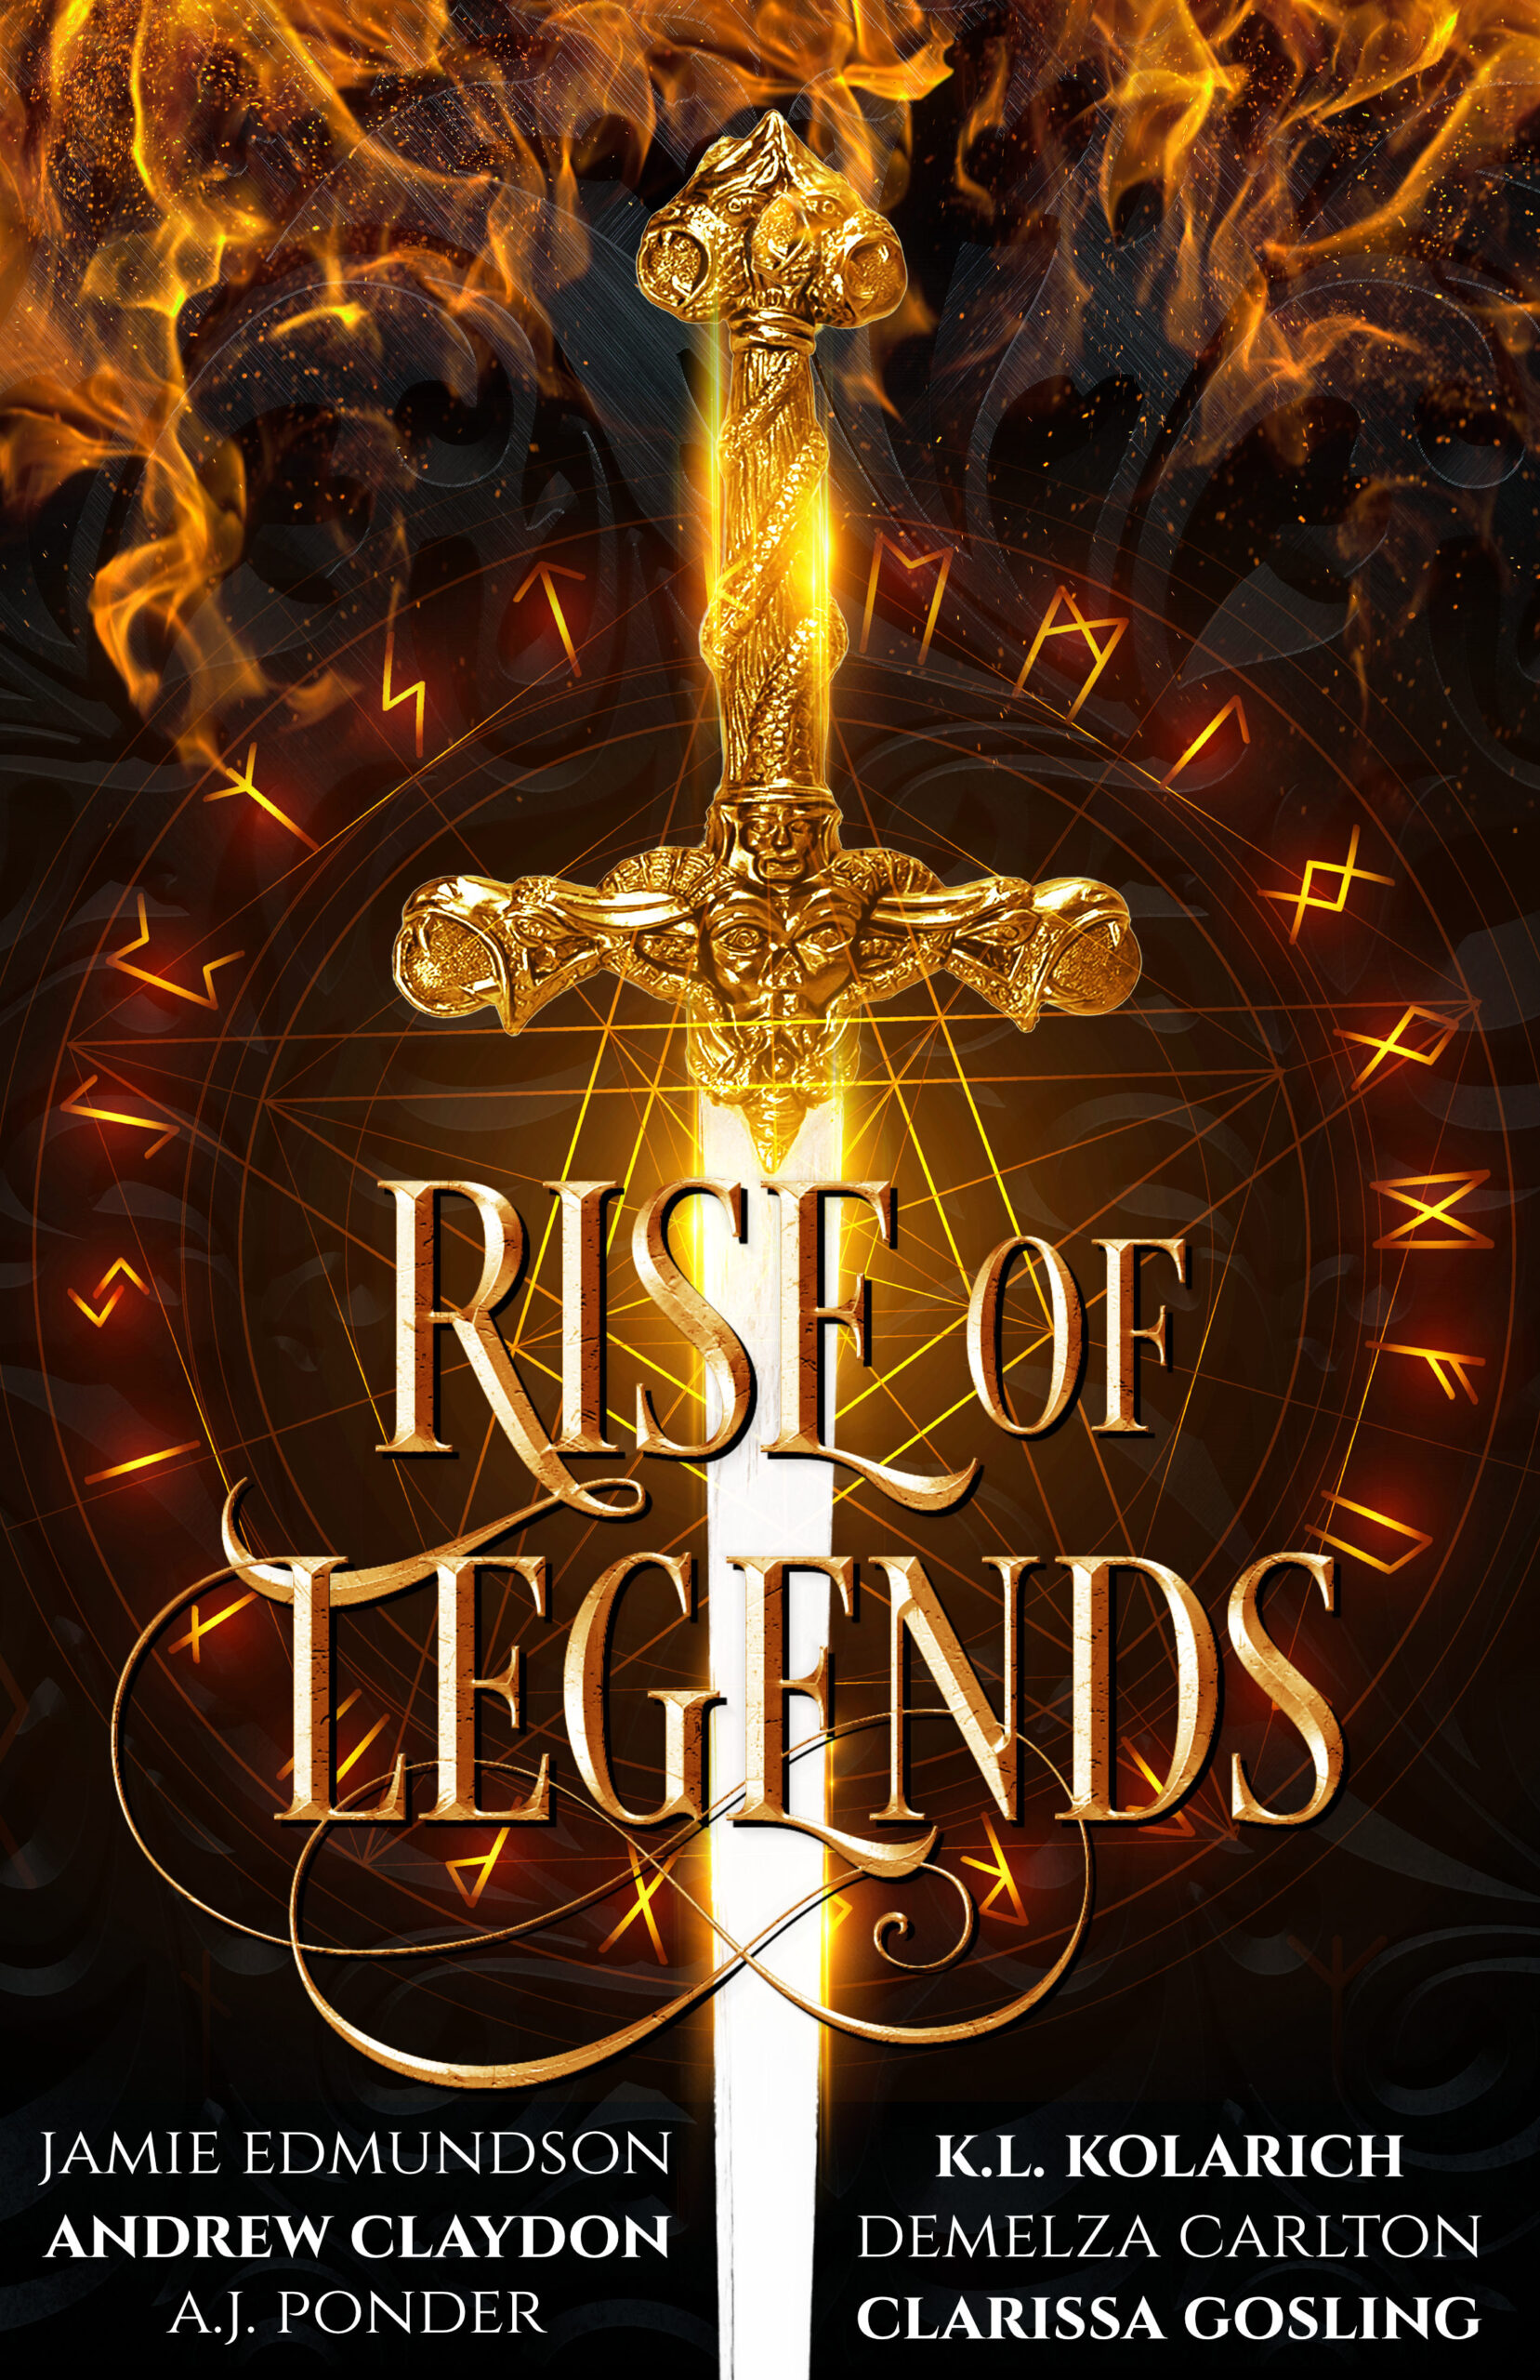 Rise of legends boxset containing six full-length stories